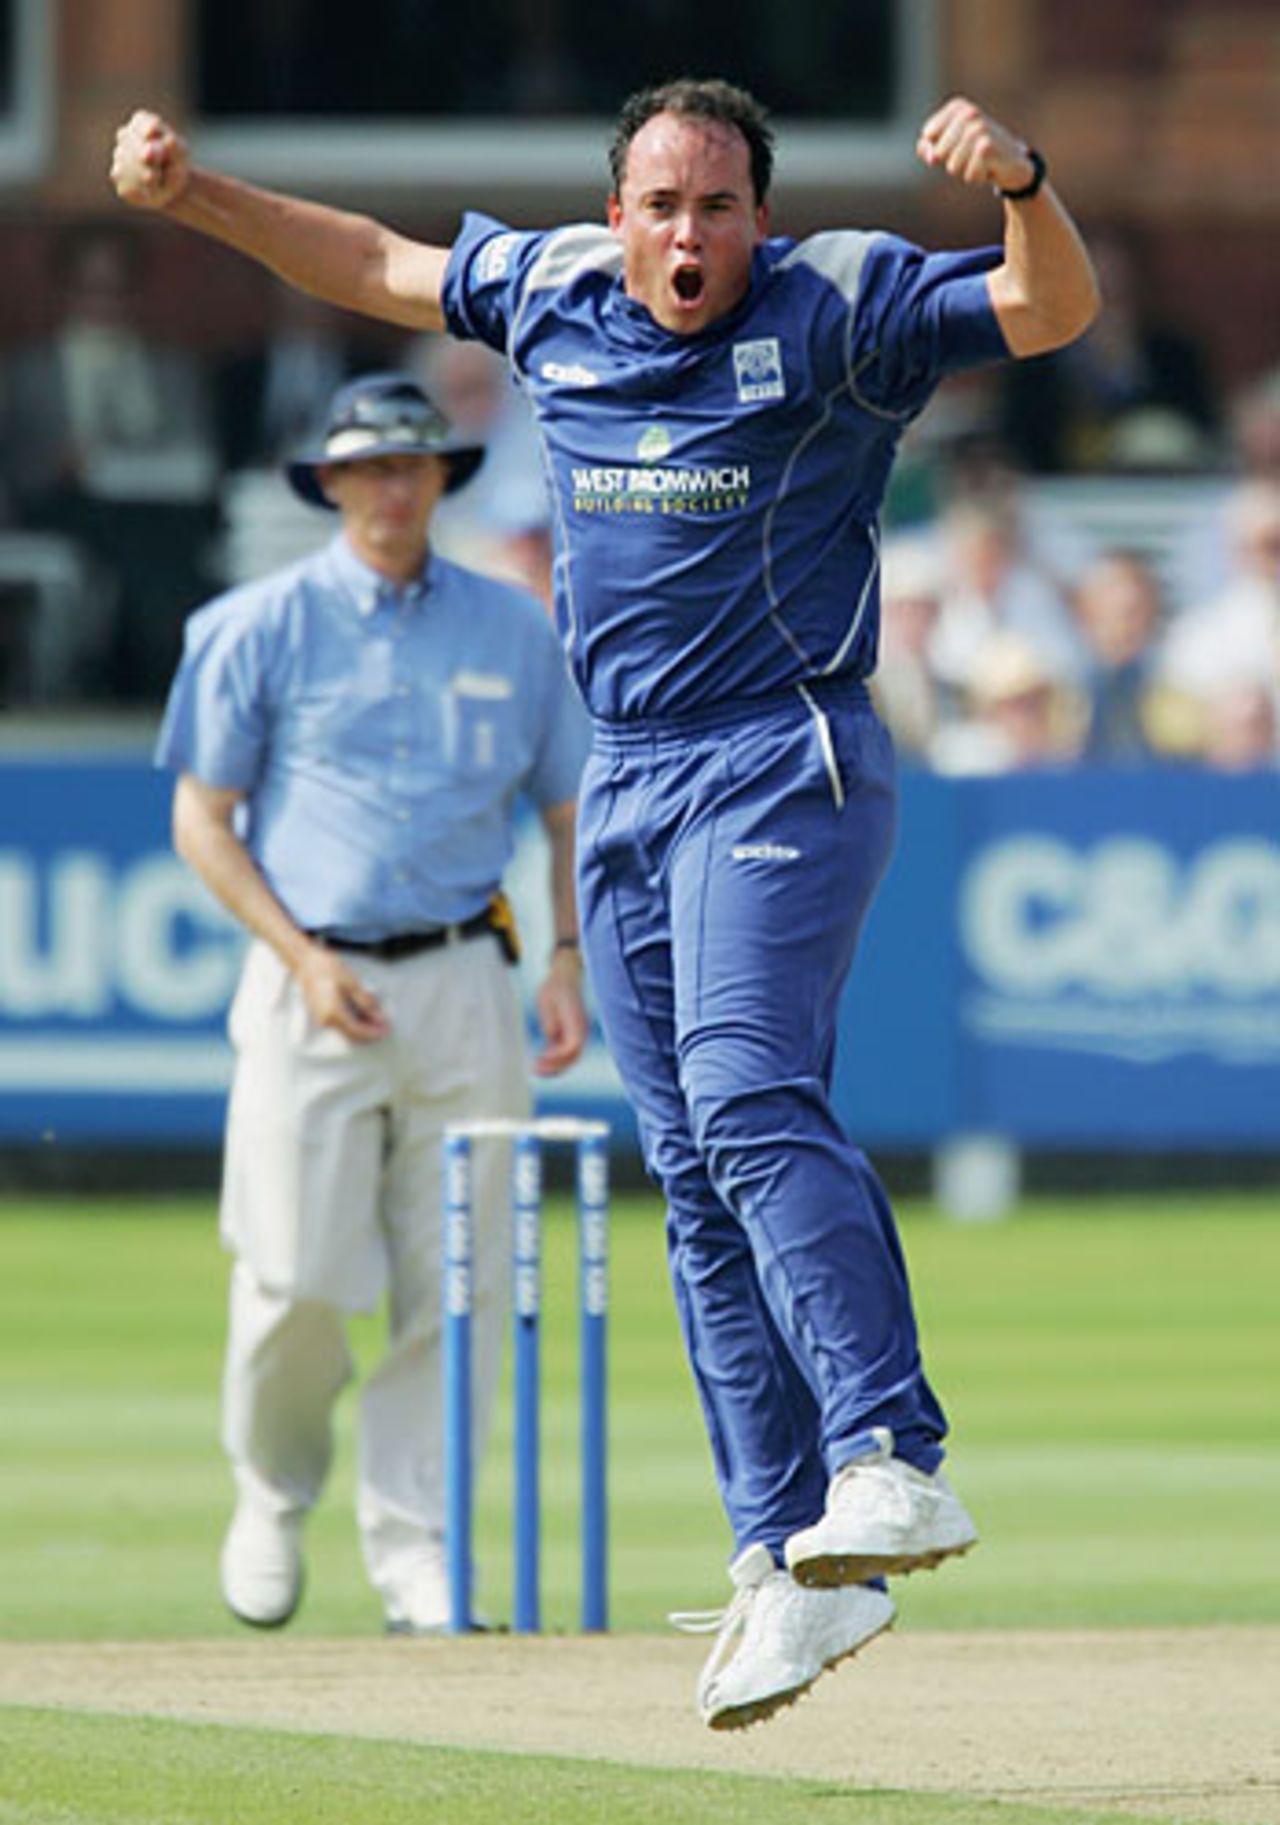 Neil Carter celebrates a wicket, Hampshire v Warwickshire, Lord's, September 3, 2005